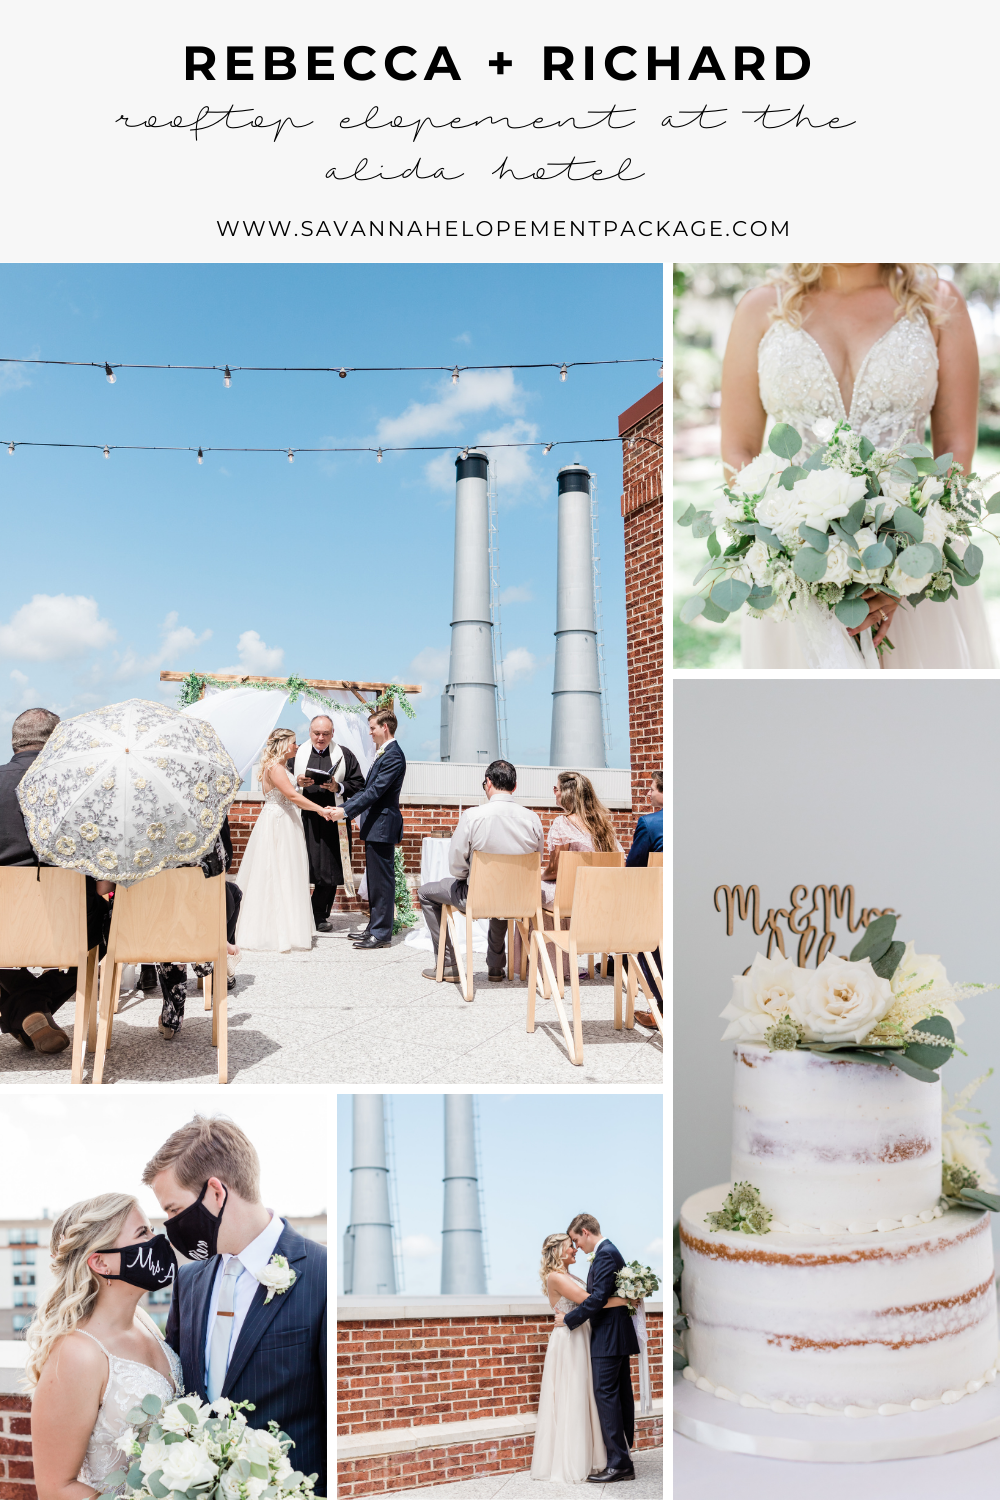  Rooftop Elopement at The Alida Hotel - Savannah Elopement Package